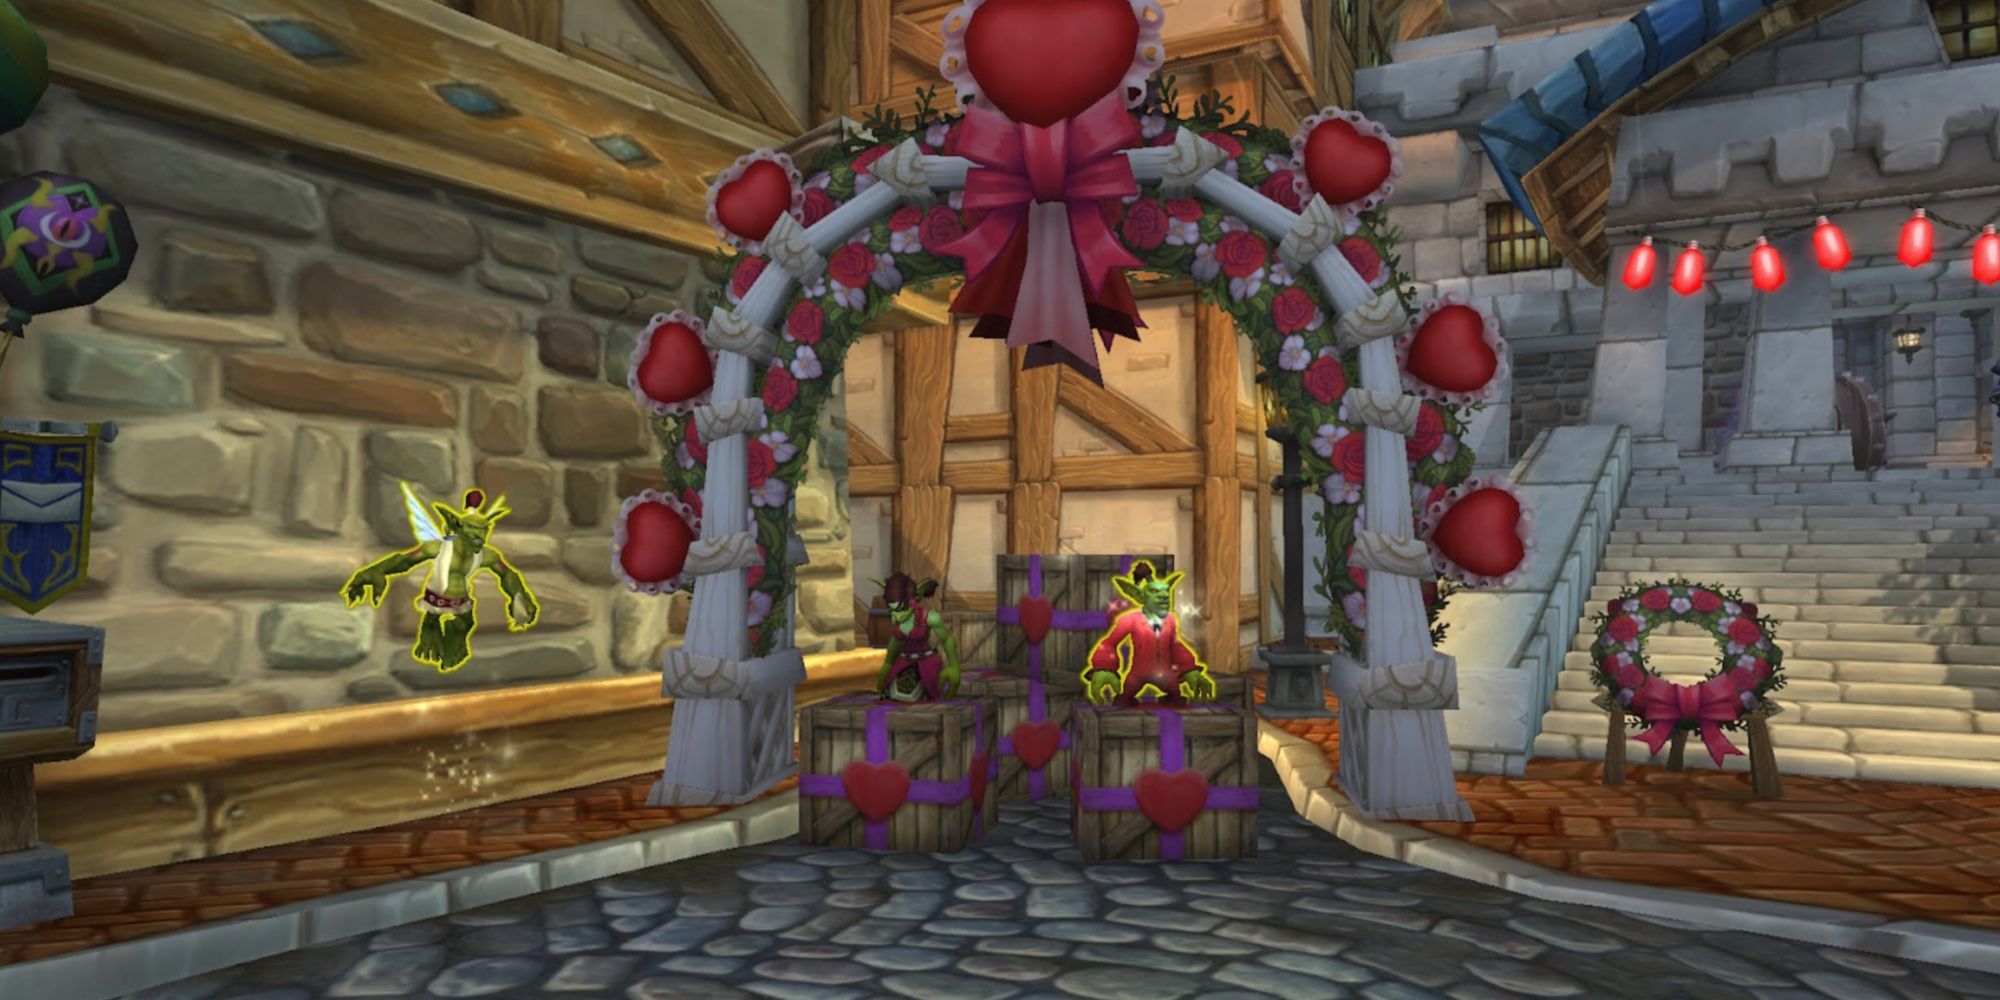 The Love Is In The Air Vendors And NPCs In Stormwind